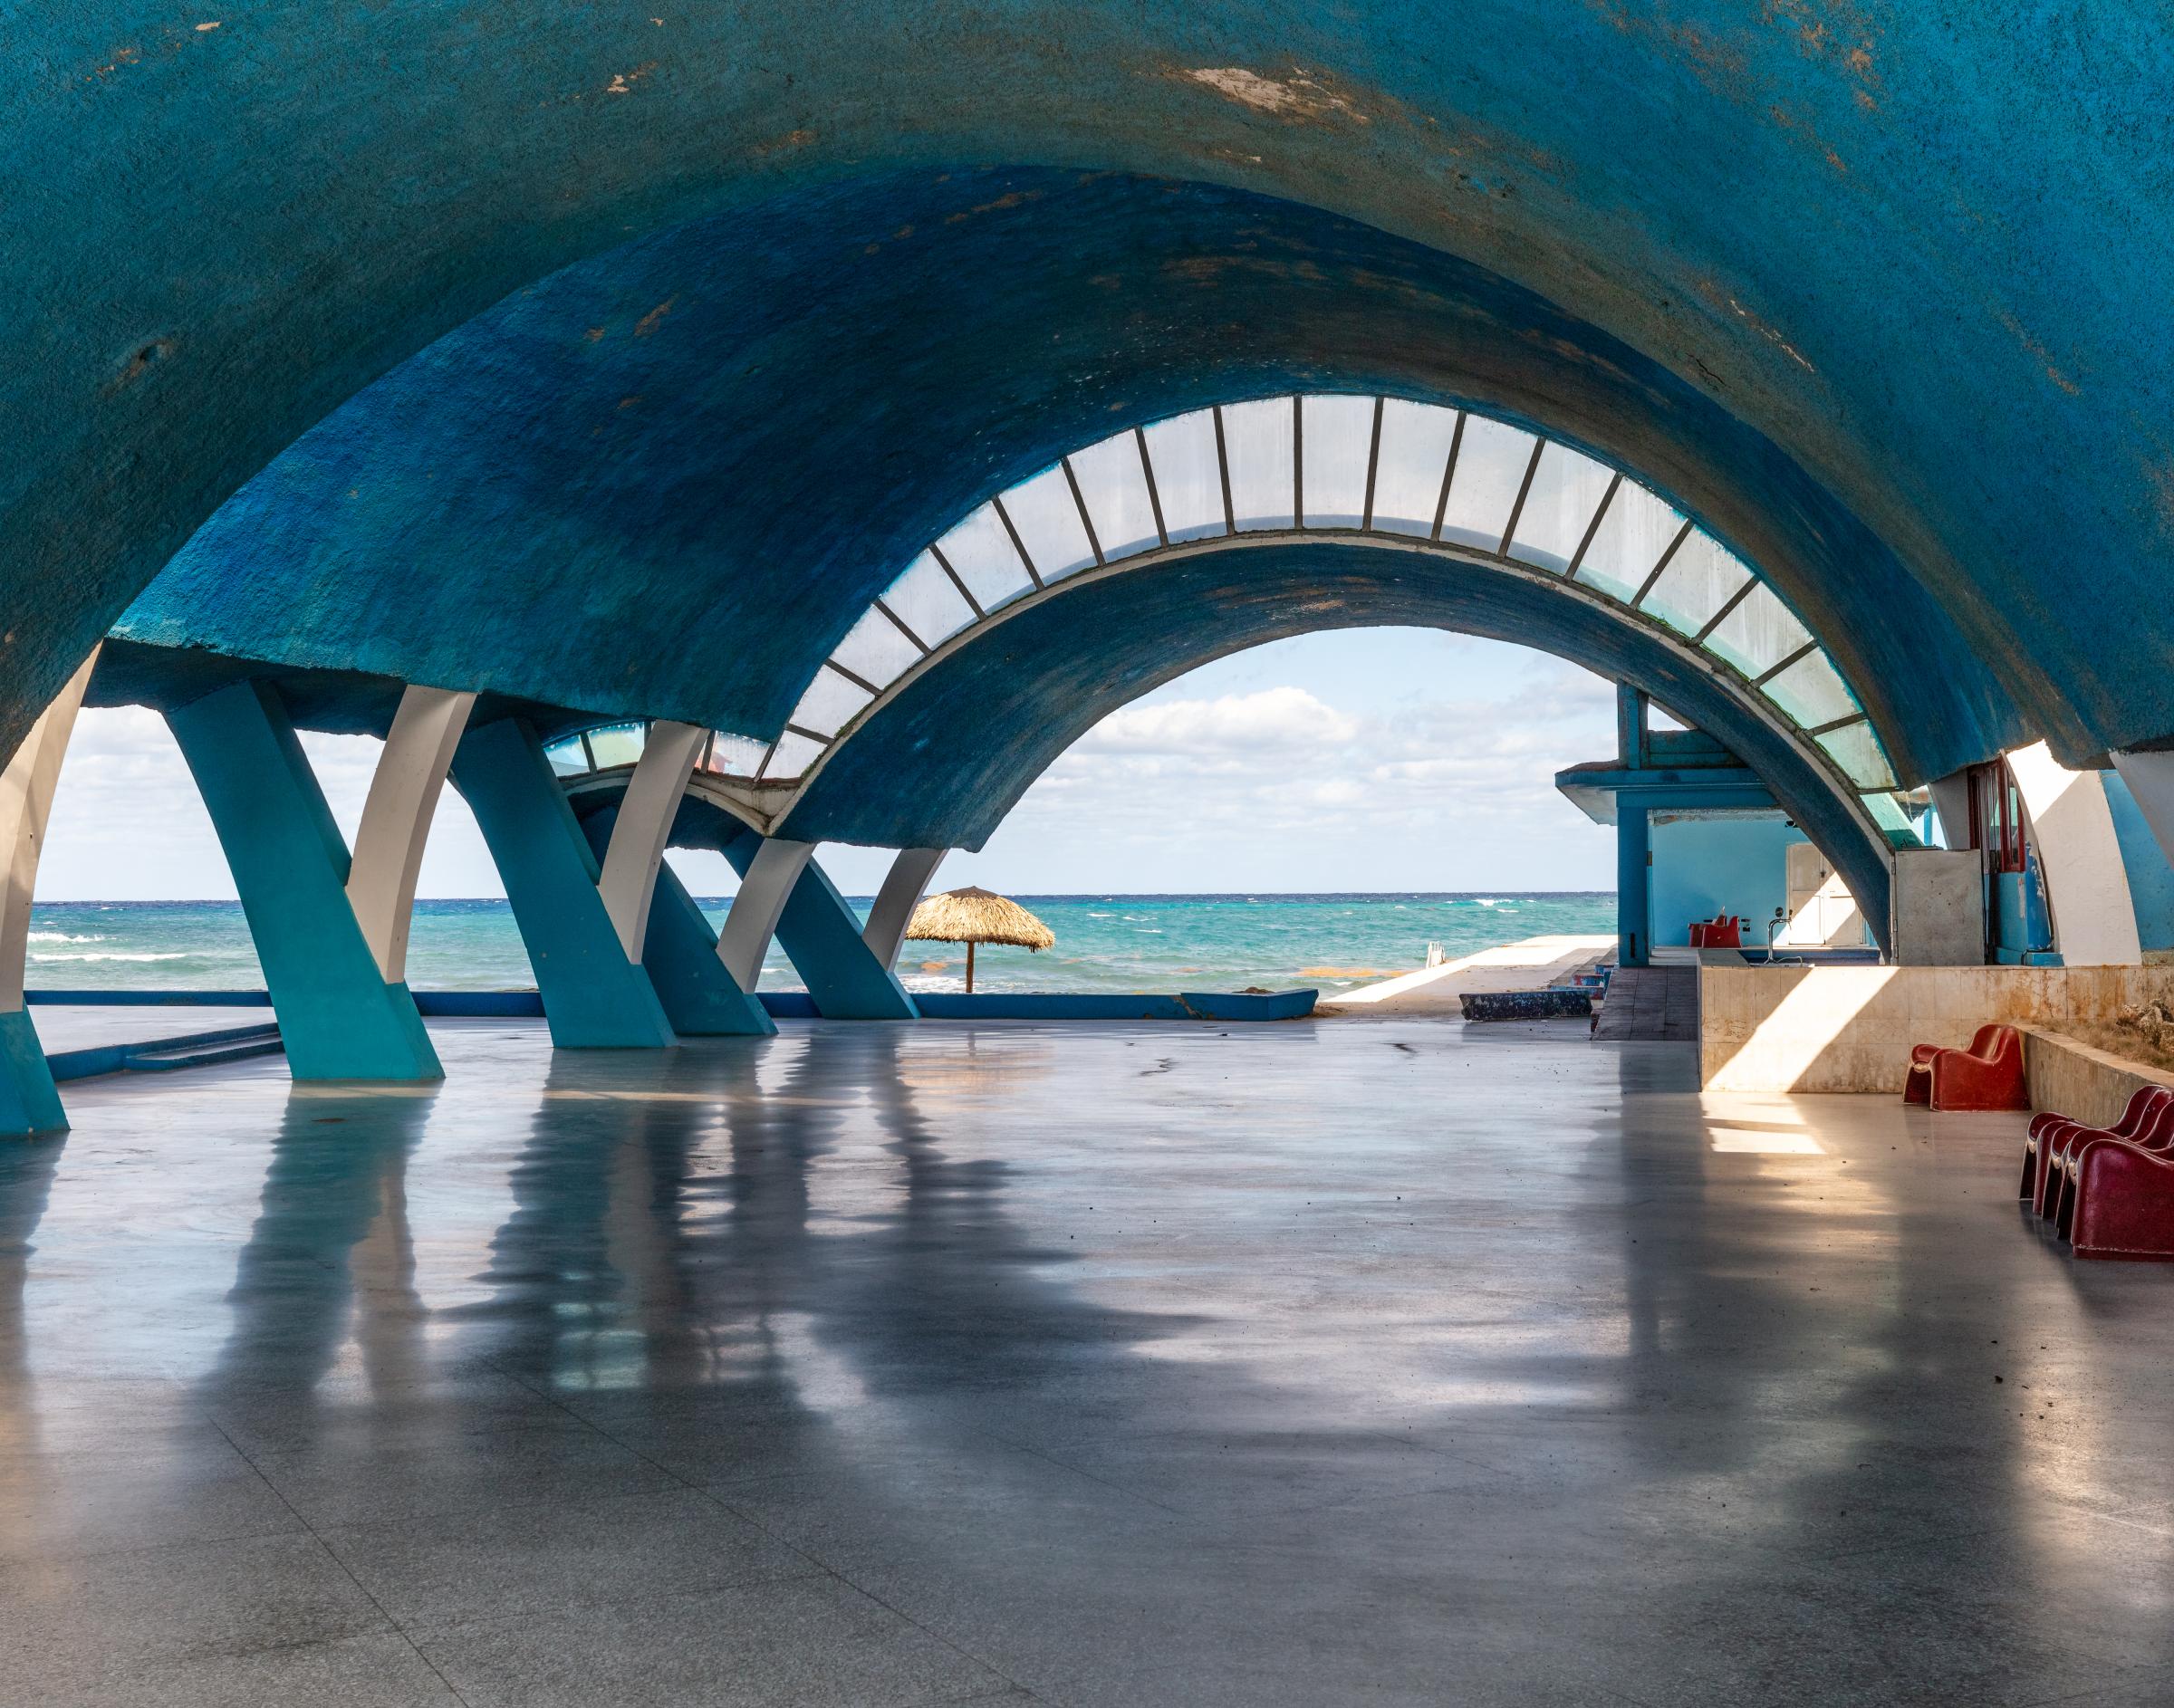 Connecting Concrete: Modernist Architecture from Havana to Miami - Nautical Club, 1953